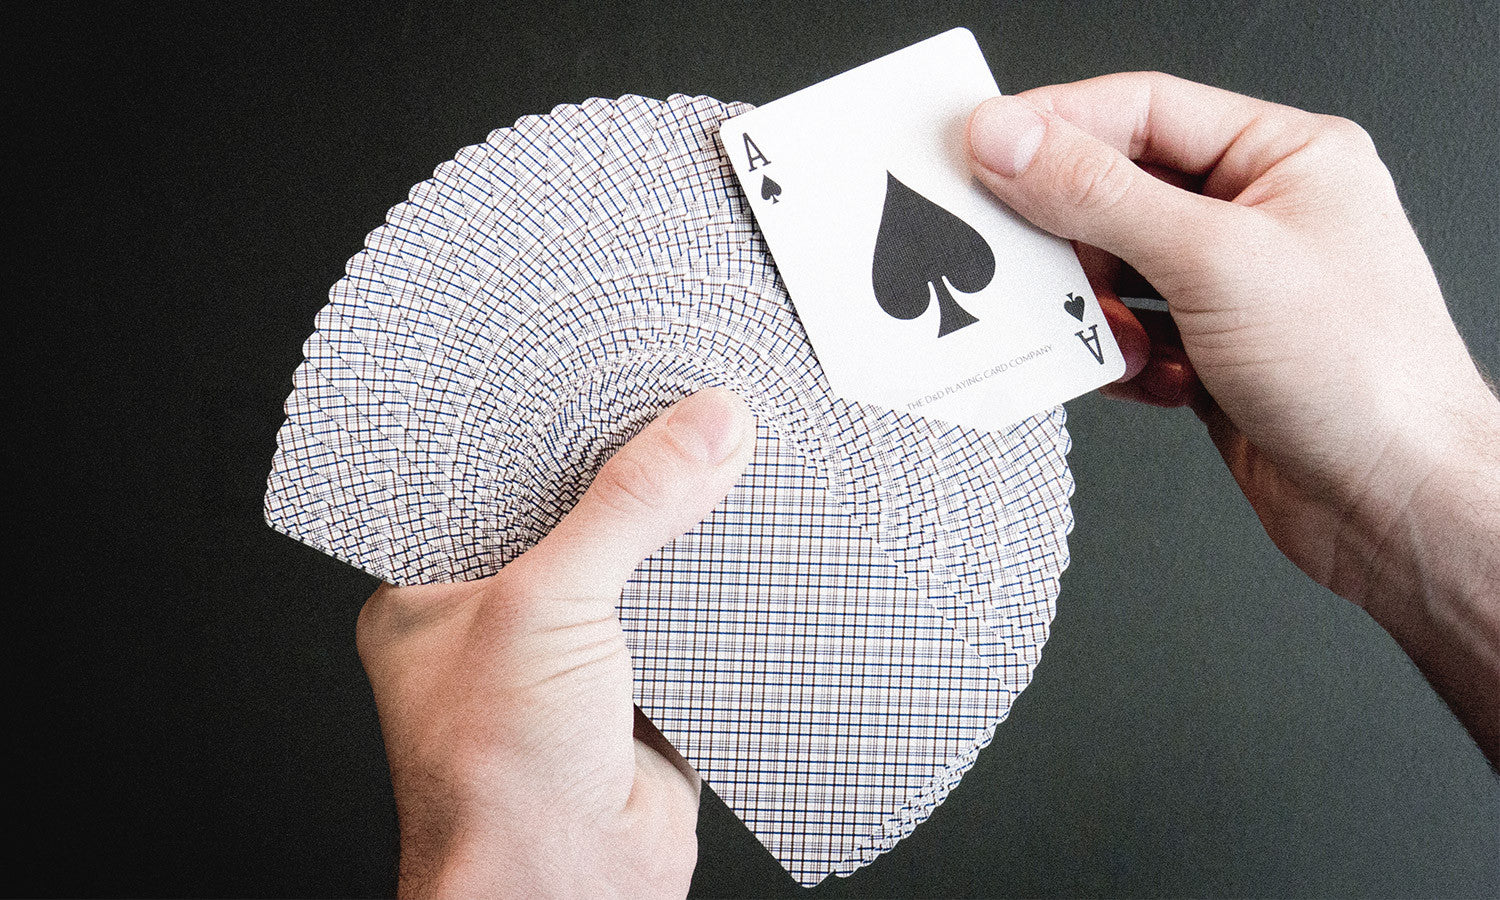 10 Magic Tricks With Hands Only